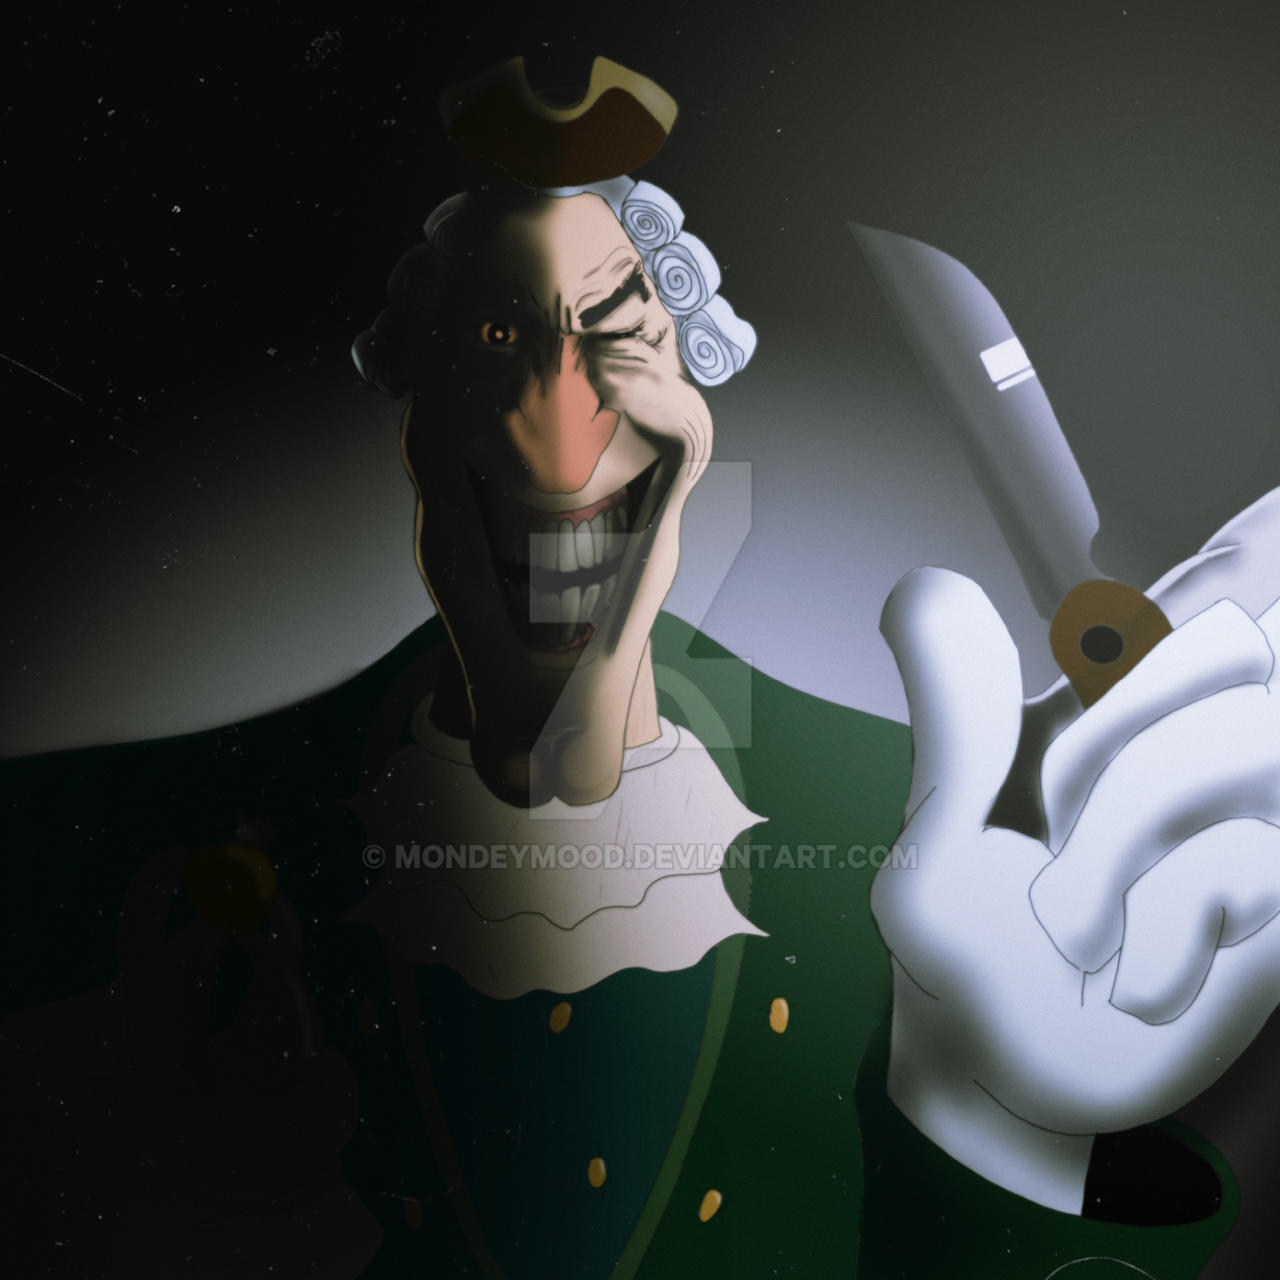 DR. Livesey by C4TC4RD on DeviantArt